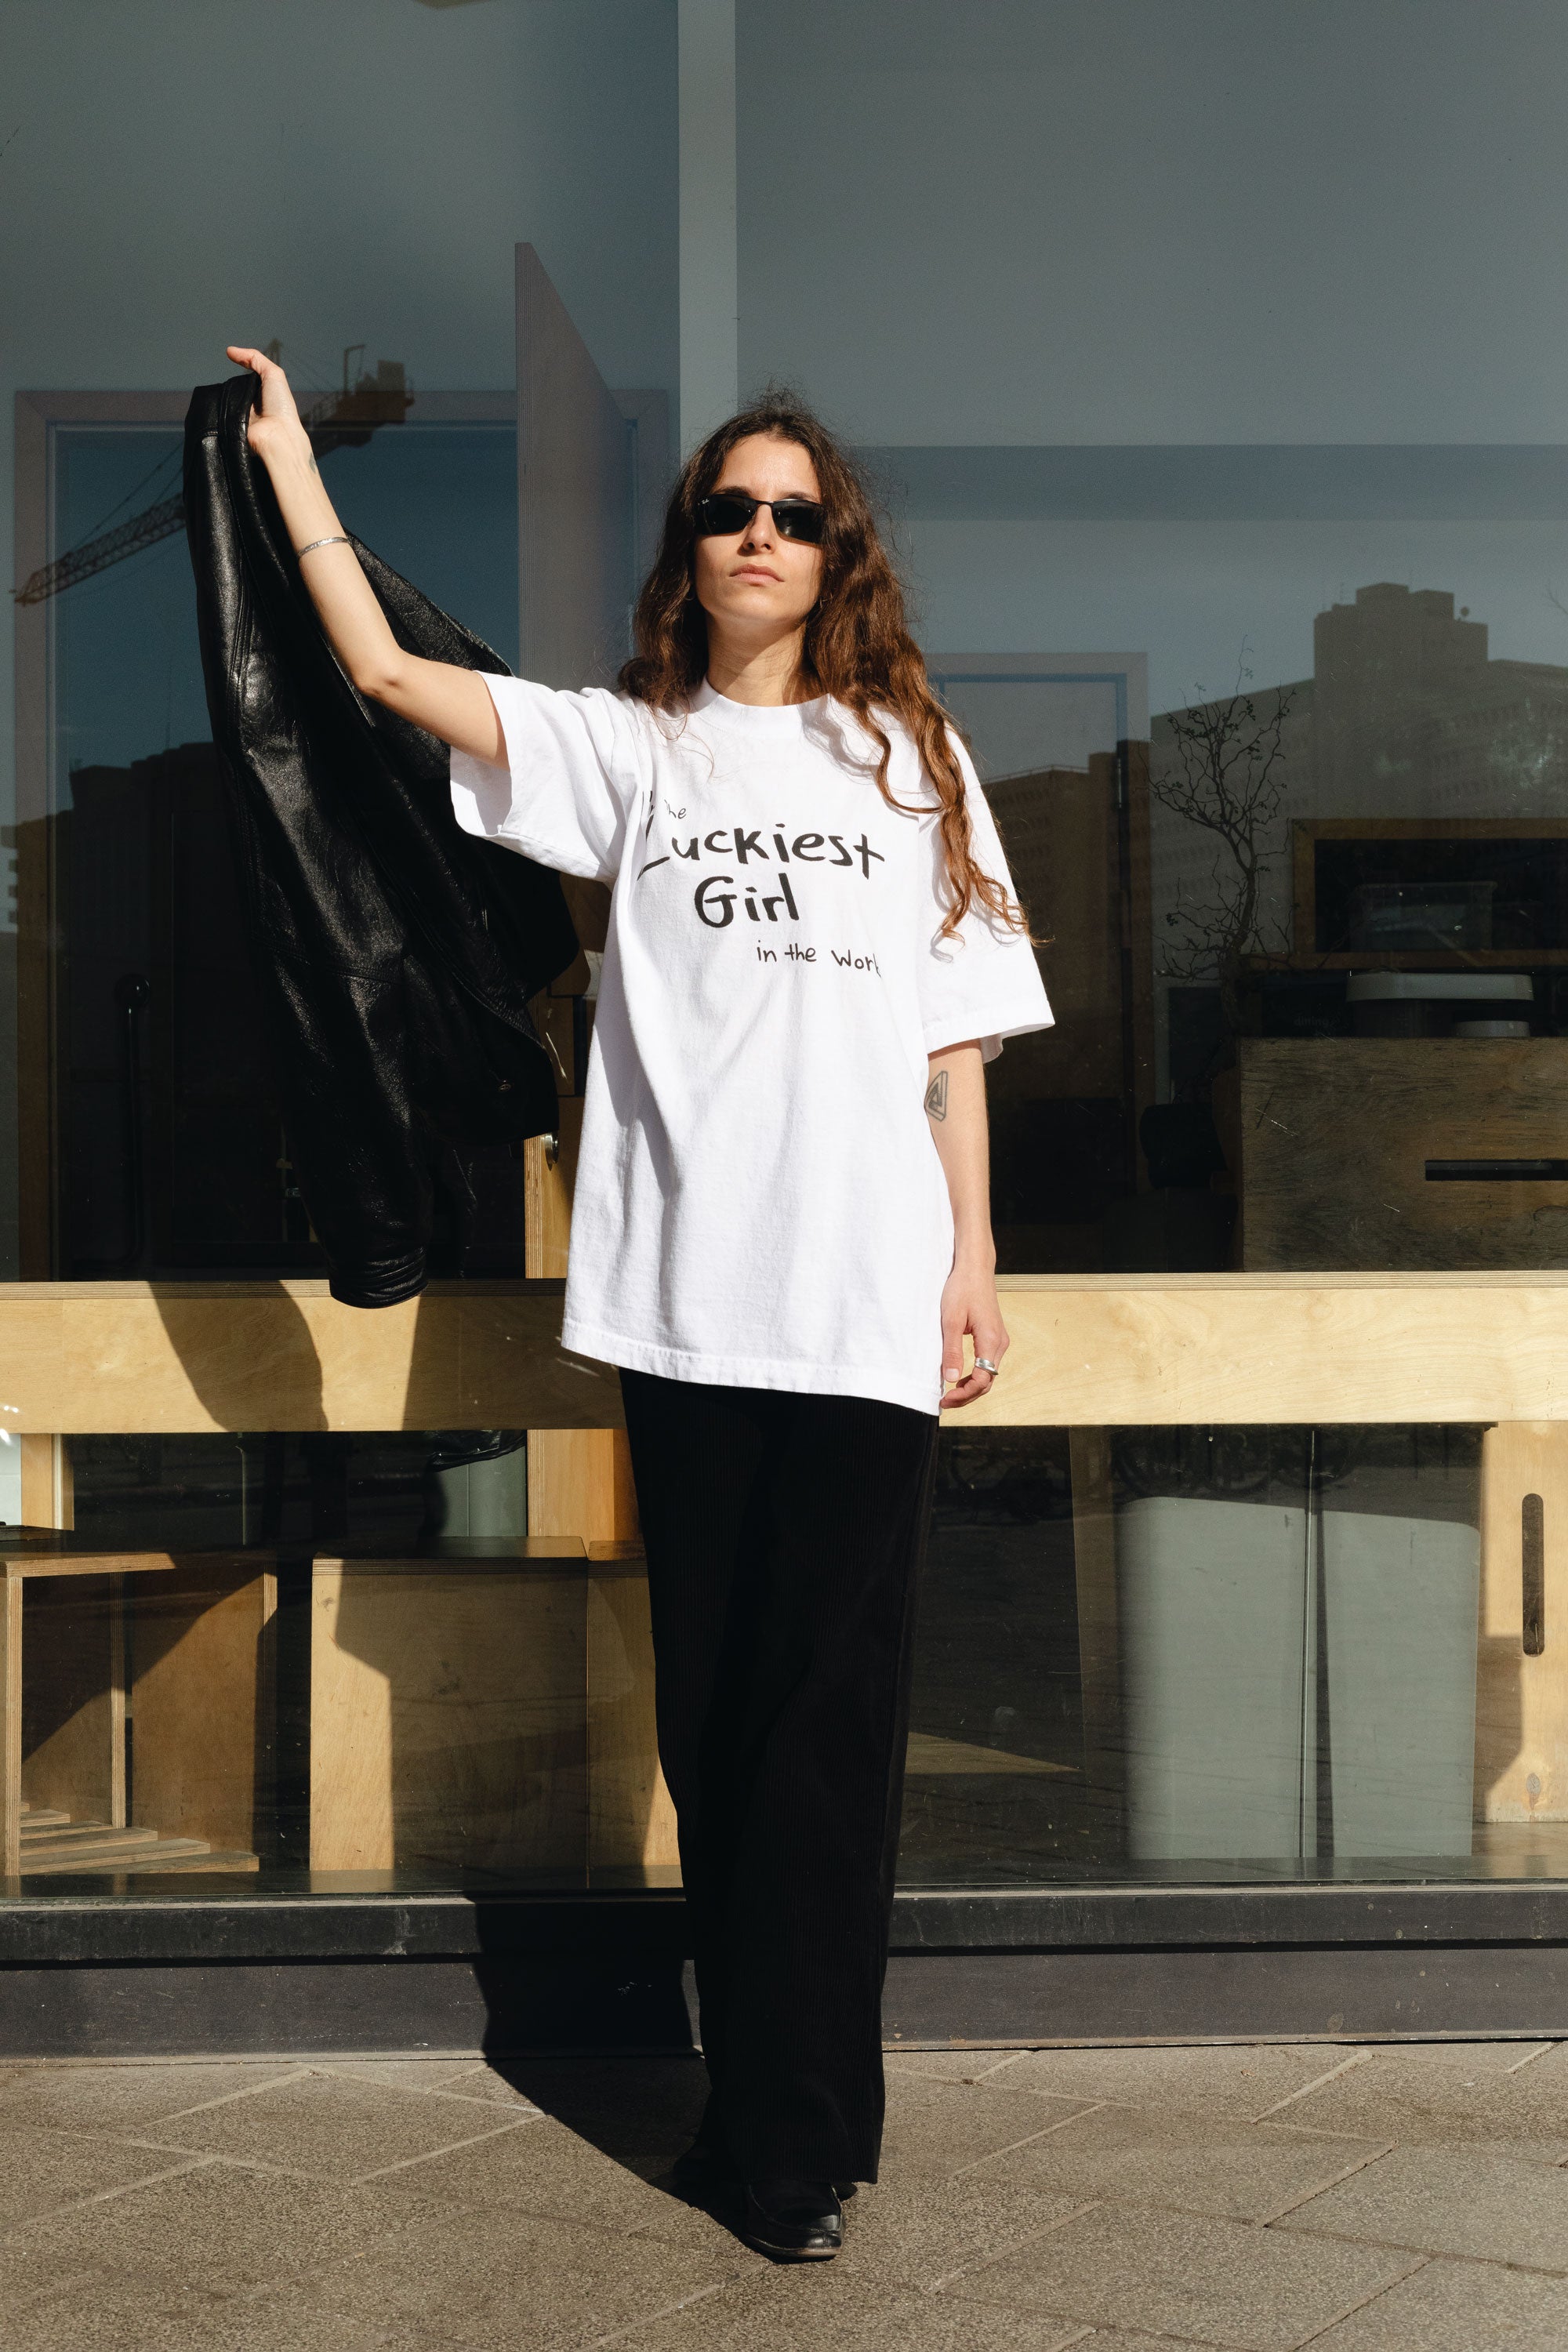 DABUSH LUCKY GIRL T-SHIRT. 100% Cotton, oversized tee with Back and front print. Made in Tel aviv. Shop and view the latest Drops from the official DABUSH website. Worldwide Shipping. DABUSH is a publishing house, design studio and a brand based in Tel Aviv, Israel. Lucky Girl Syndrome T-SHIRT.